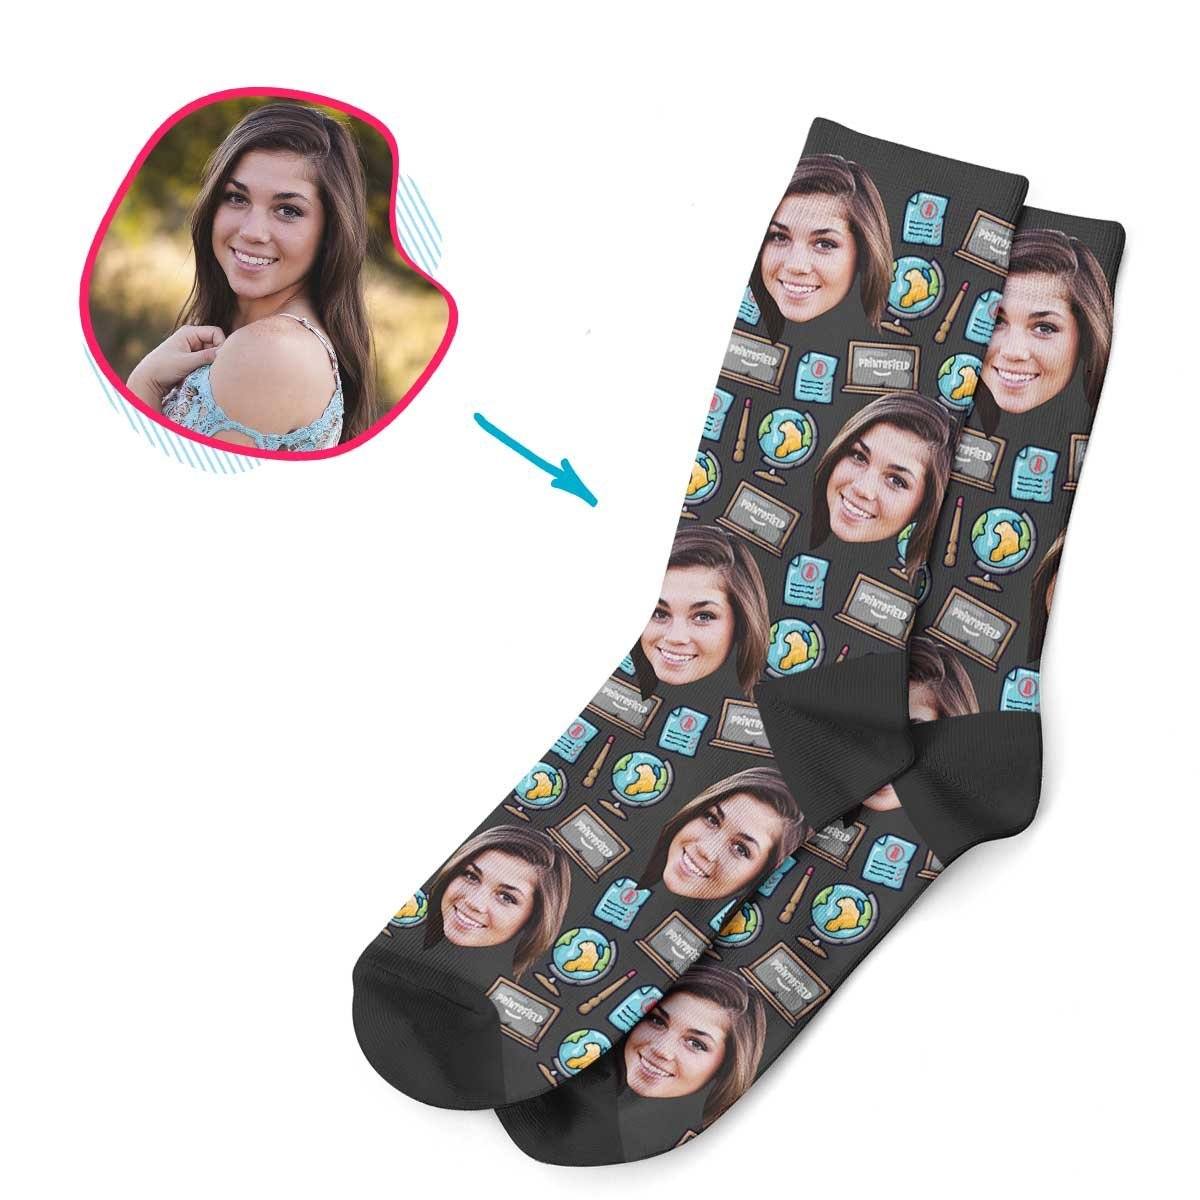 Dark Teacher personalized socks with photo of face printed on them